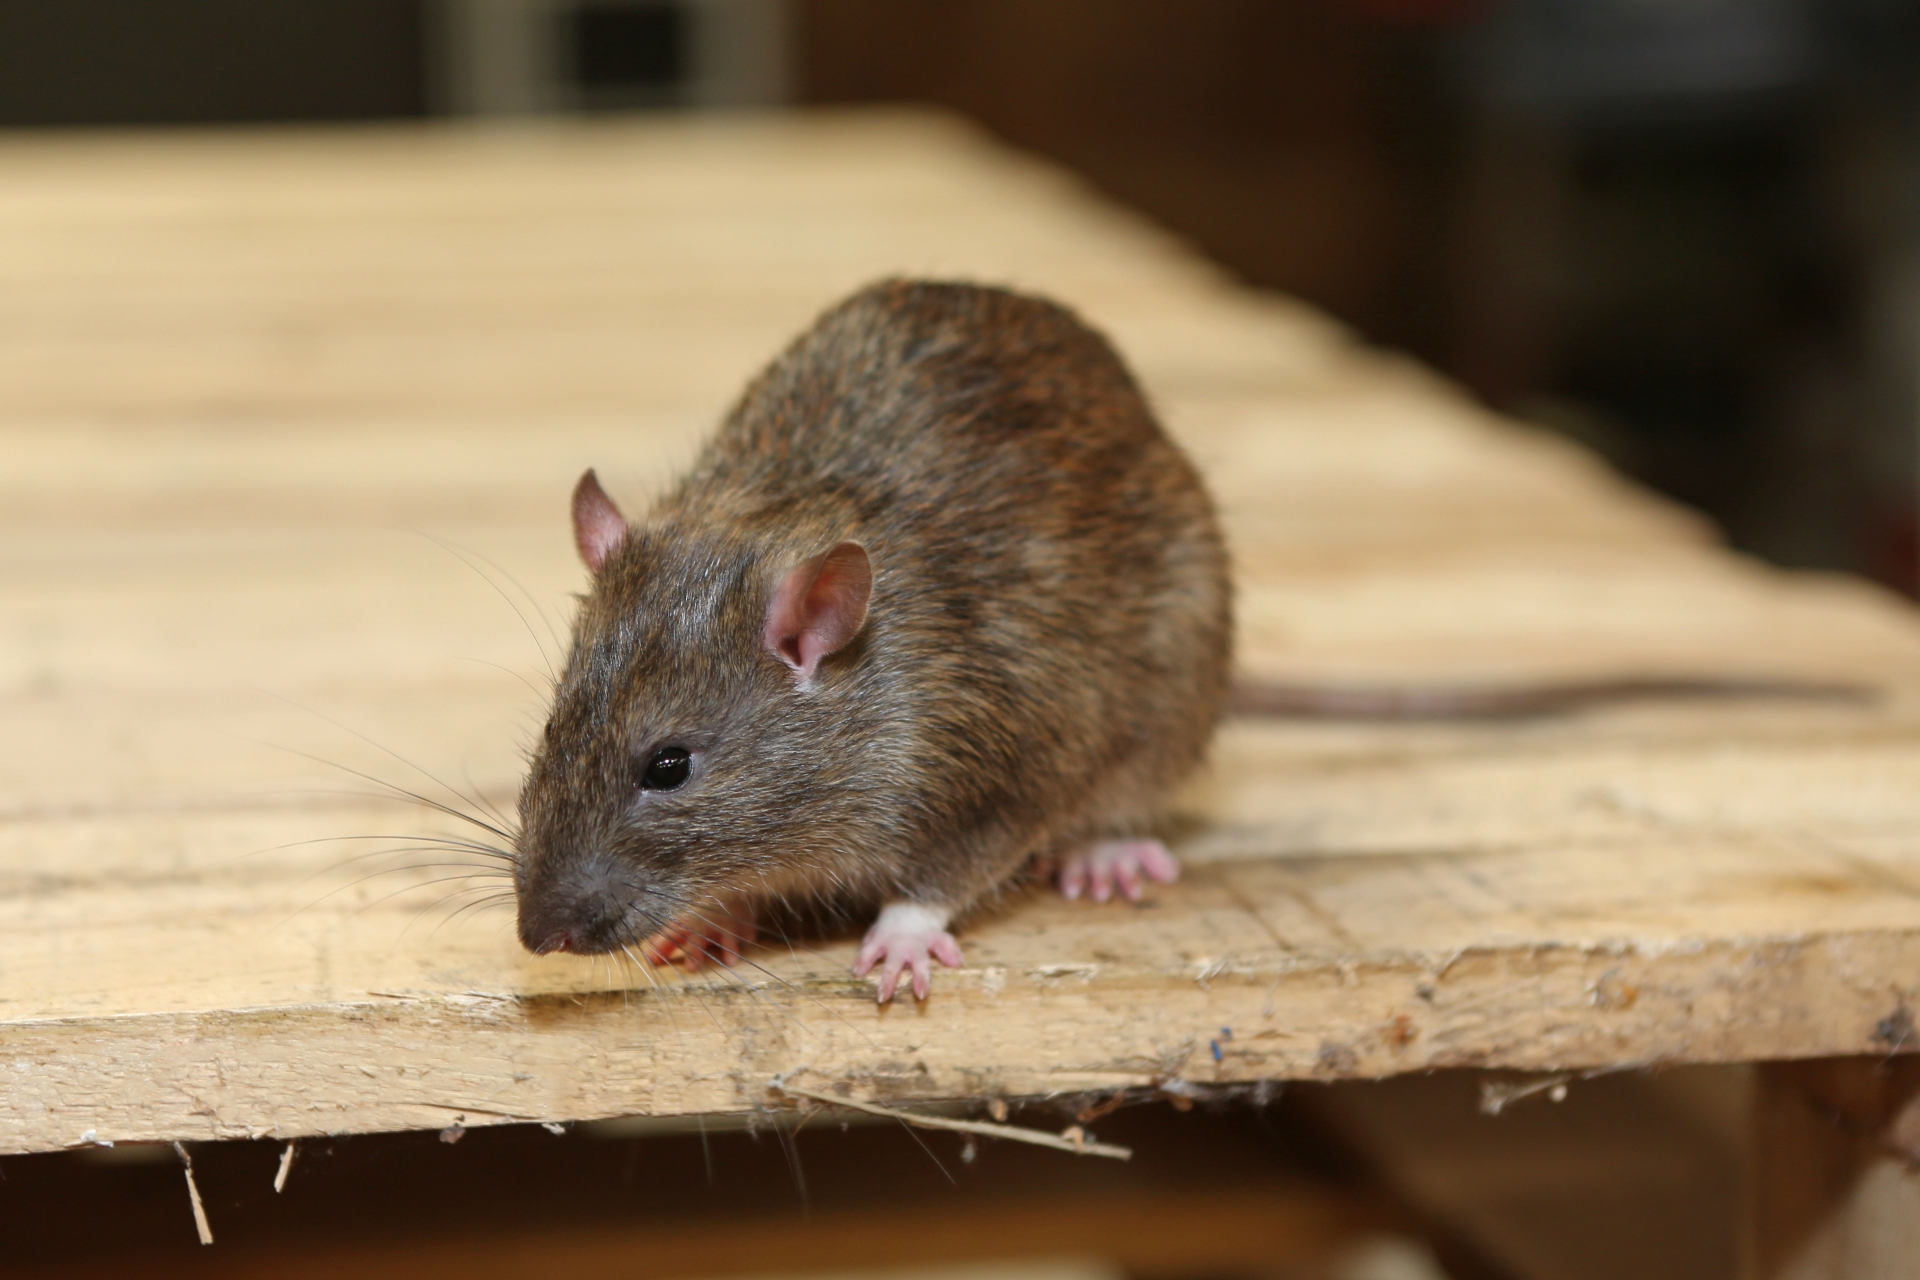 Rat extermination, Pest Control in Ashford, TW15. Call Now 020 8166 9746